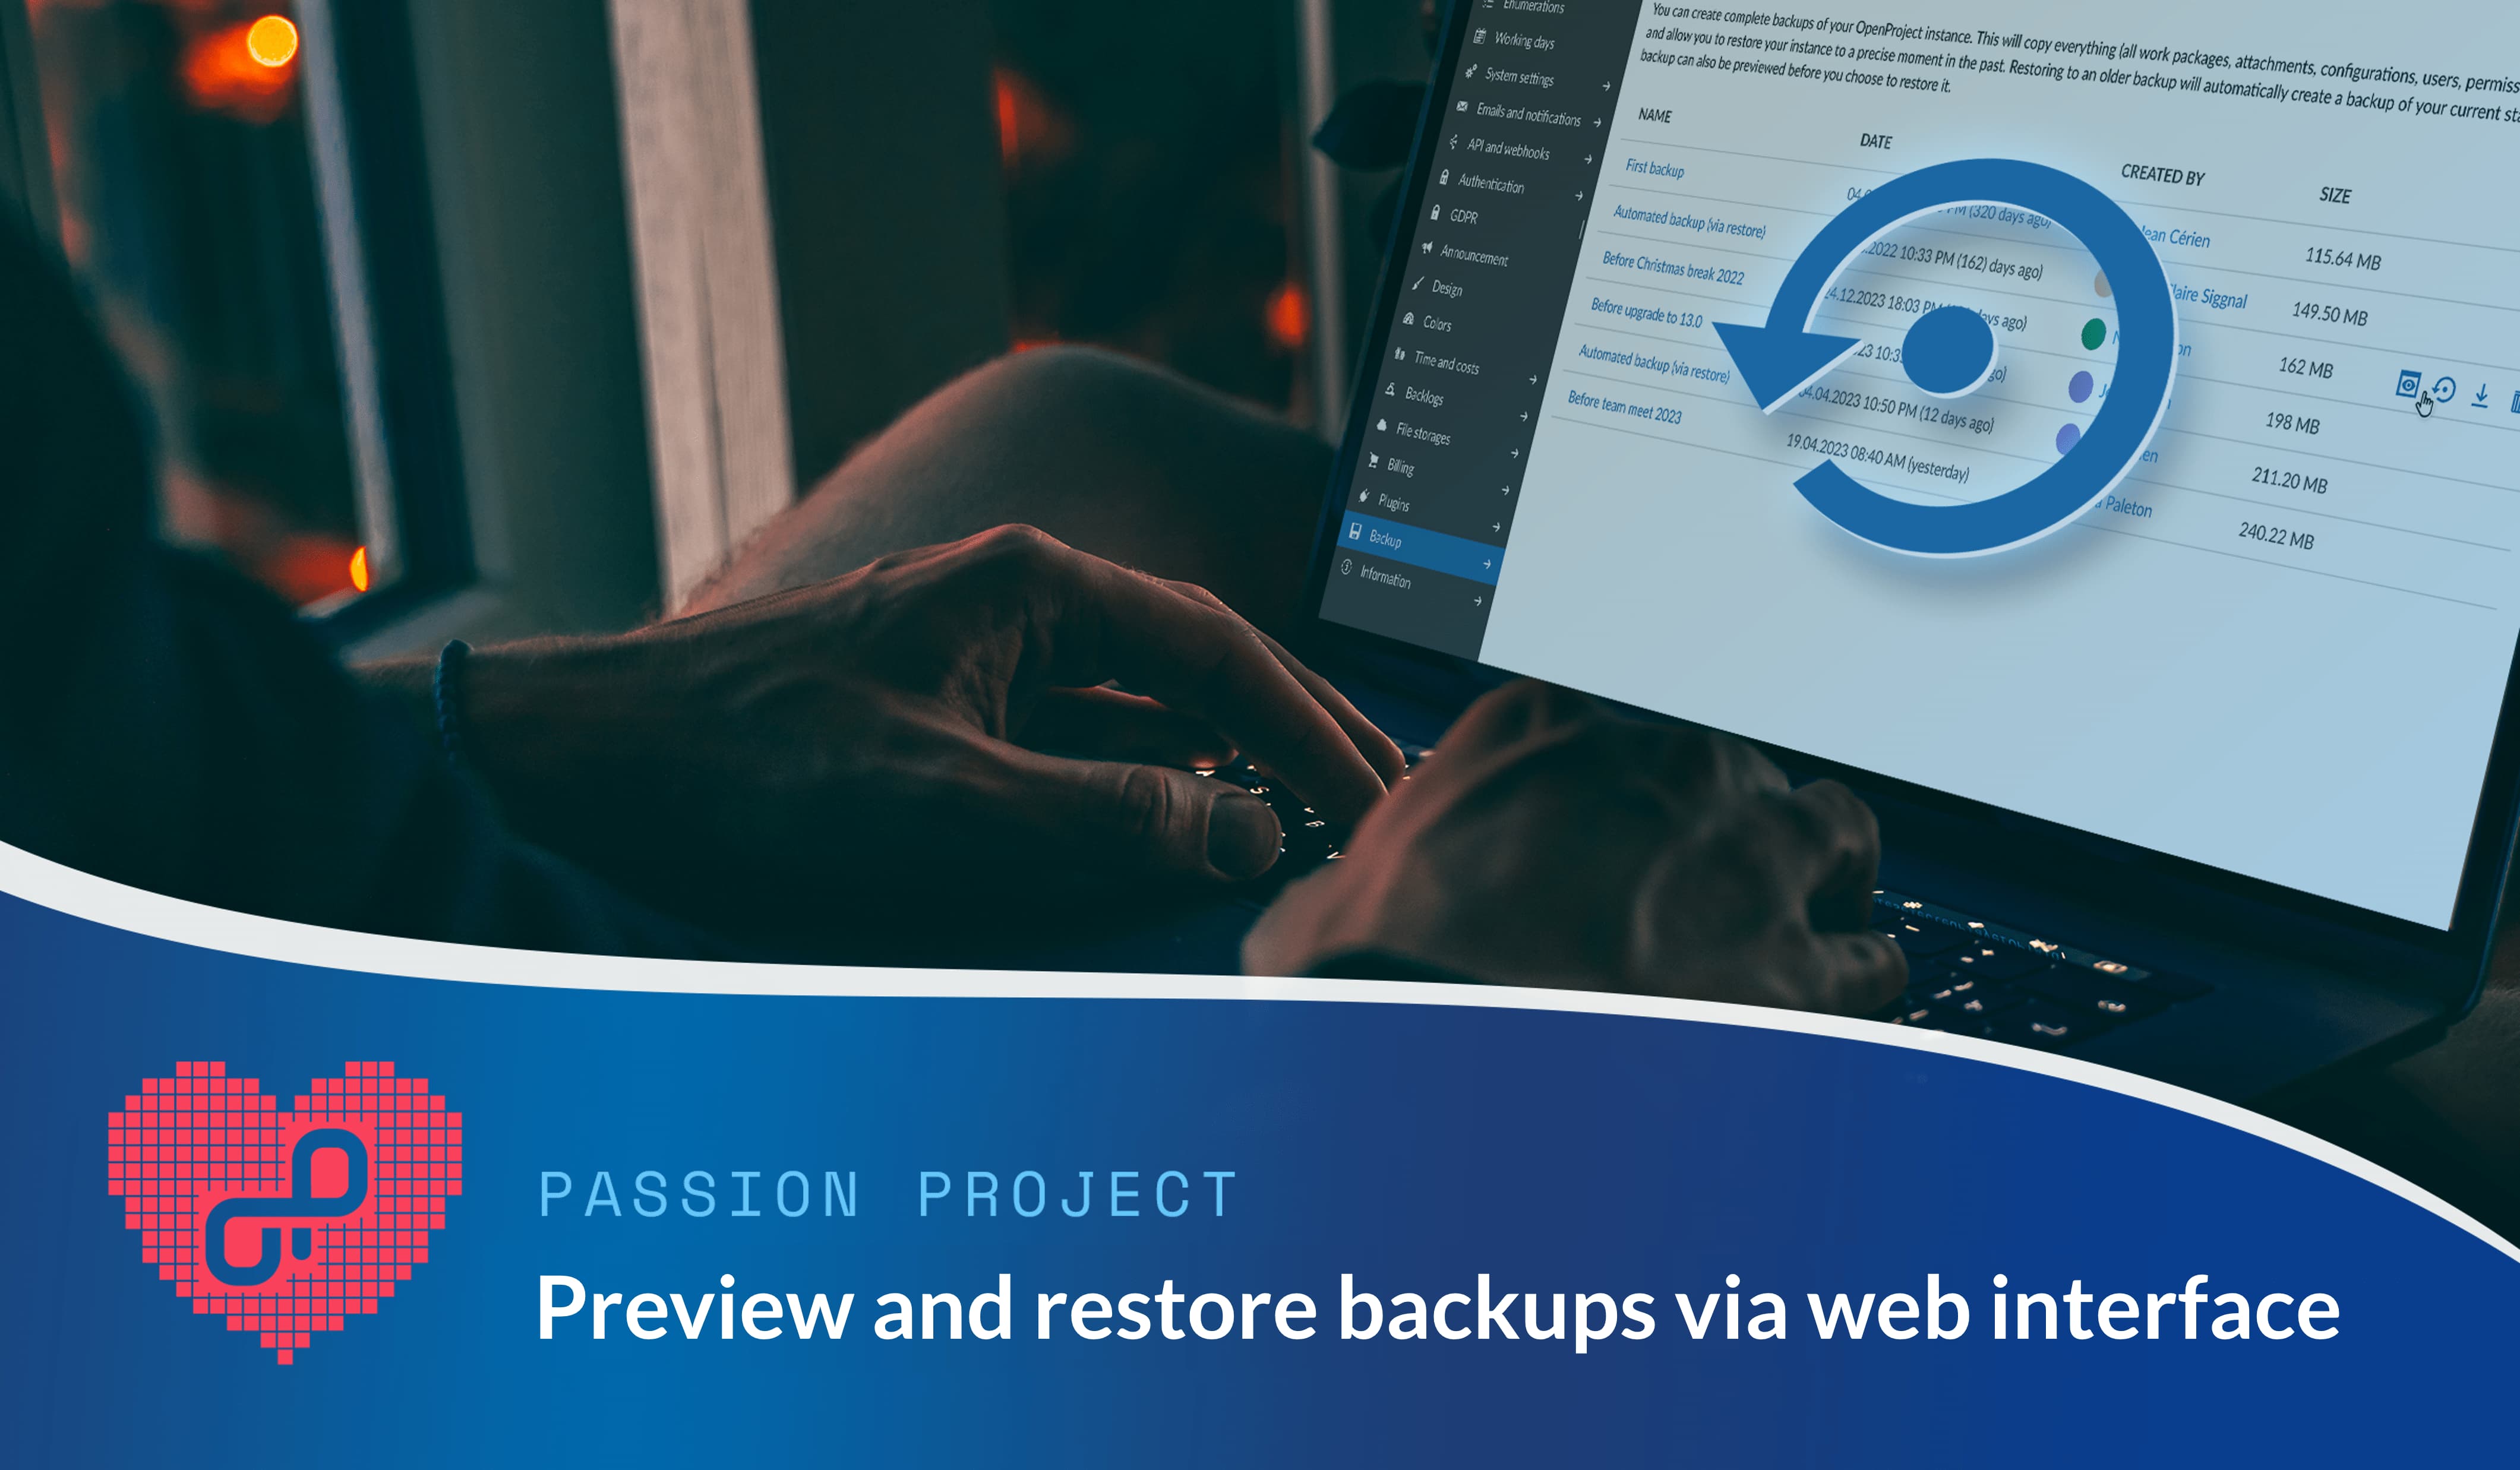 Passion project: Preview and restore backups via the OpenProject web interface